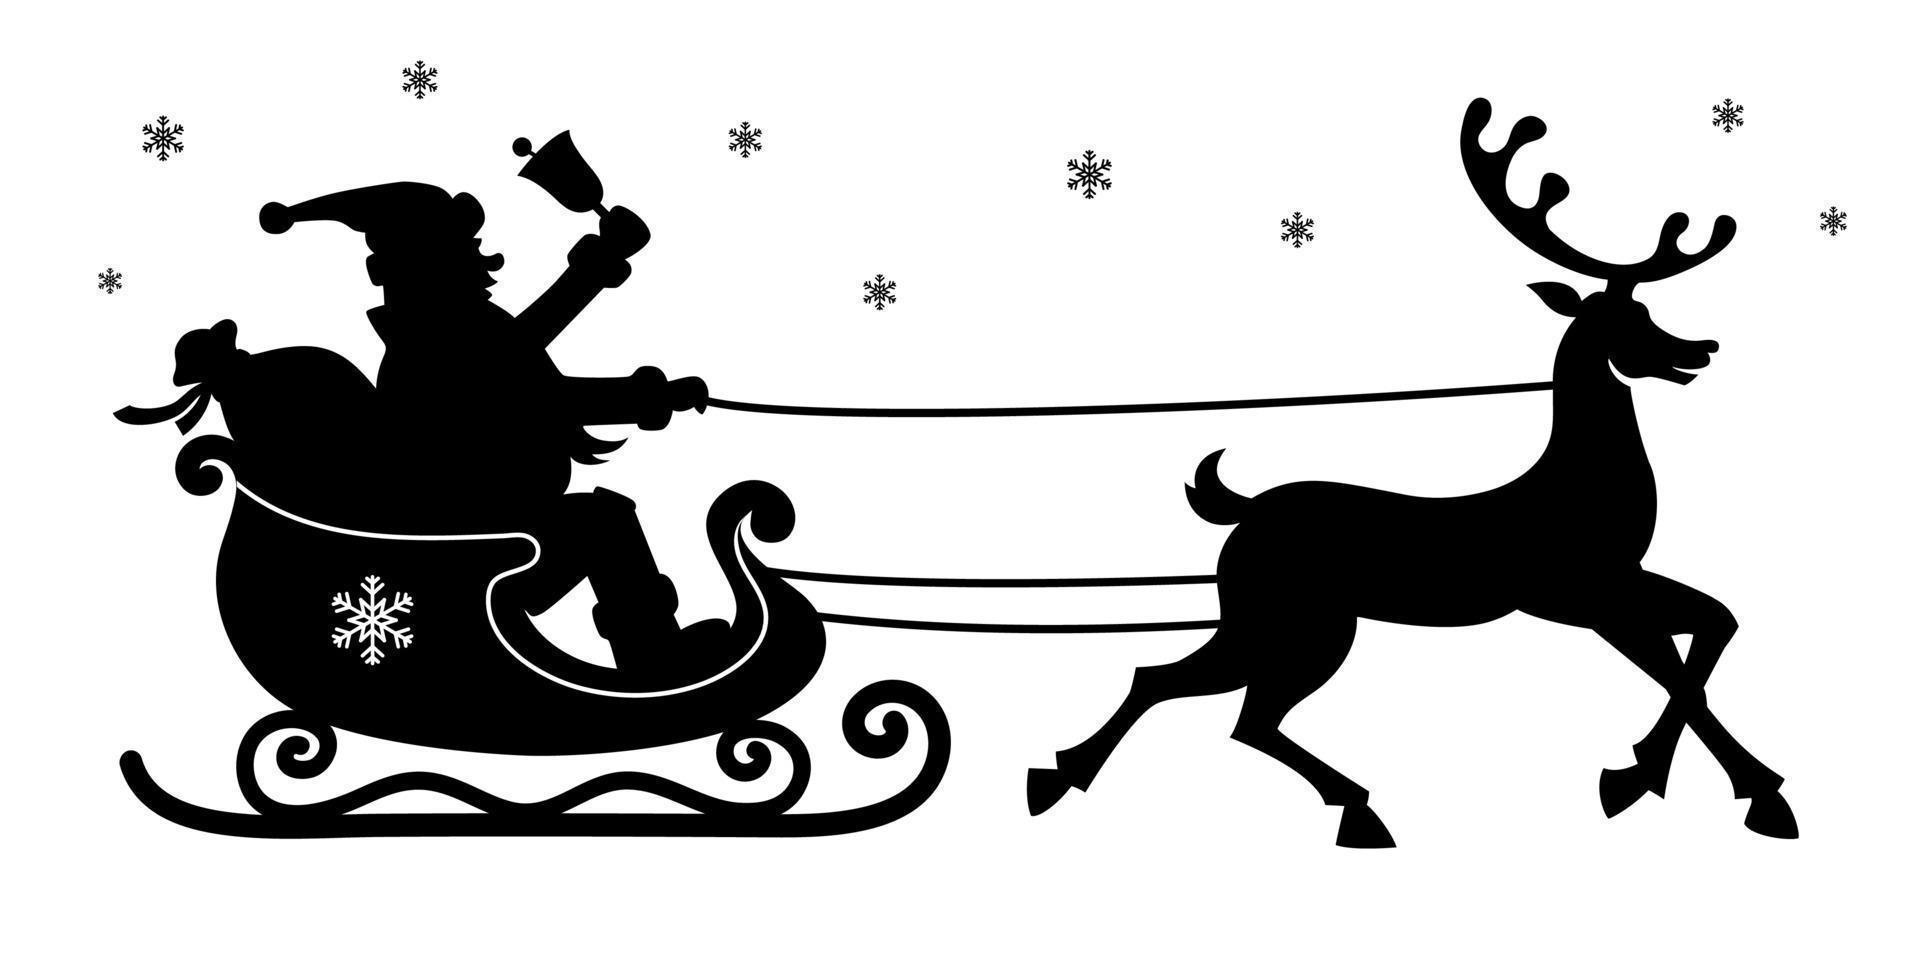 Santa in sleigh with reindeer. Vector sticker. Black vector silhouette isolated on white background